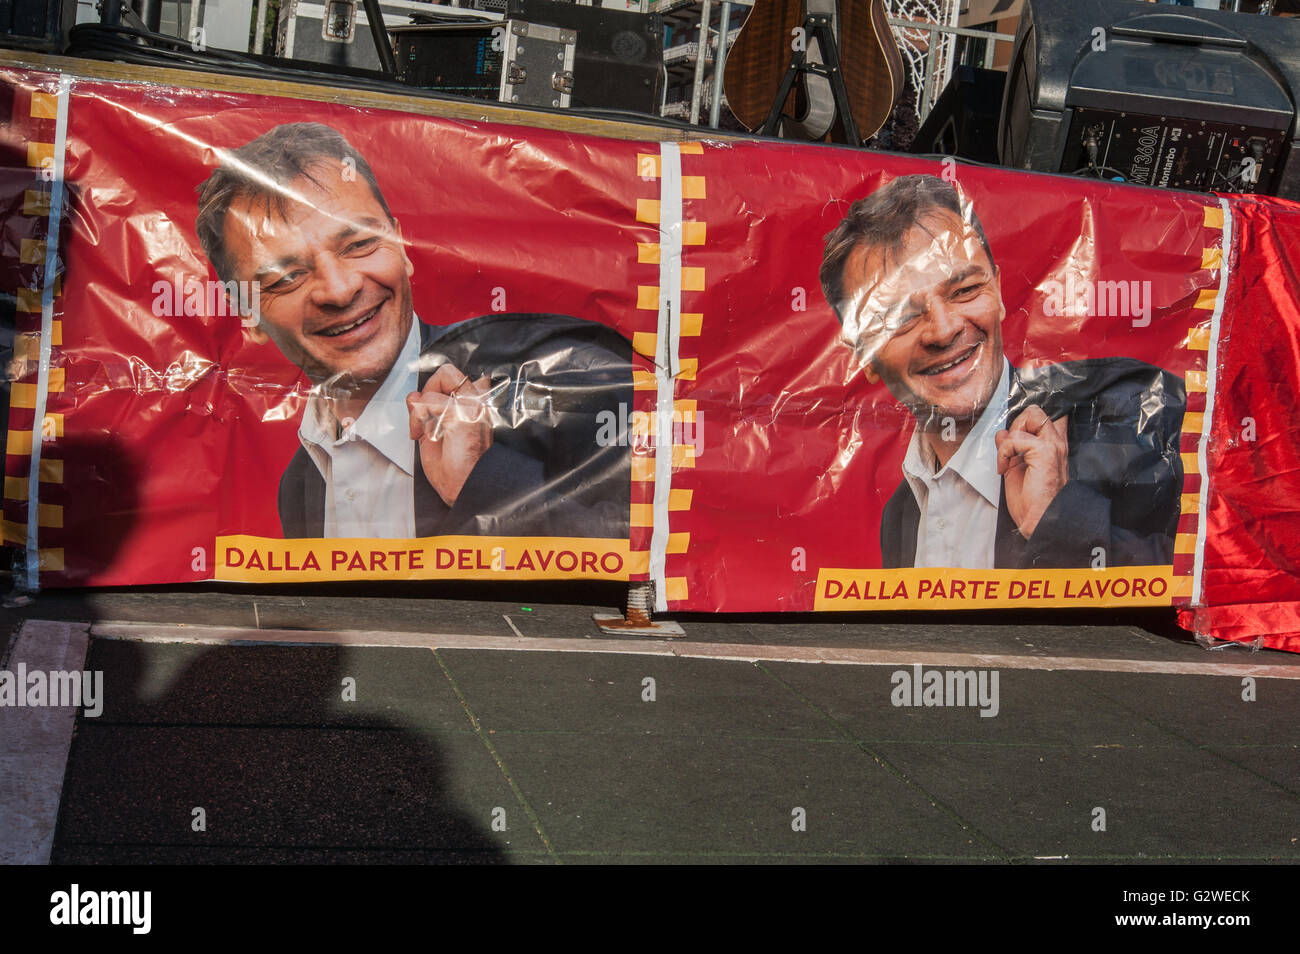 Rome, Italy. 03rd June, 2016. Banner use during the closing speech of Stefano Fassina candidate for mayor of Rome for the Left lists and for Civic Fassina Mayor, in the popular neighborhood of Centocelle. © Leo Claudio De Petris/Pacific Press/Alamy Live News Stock Photo